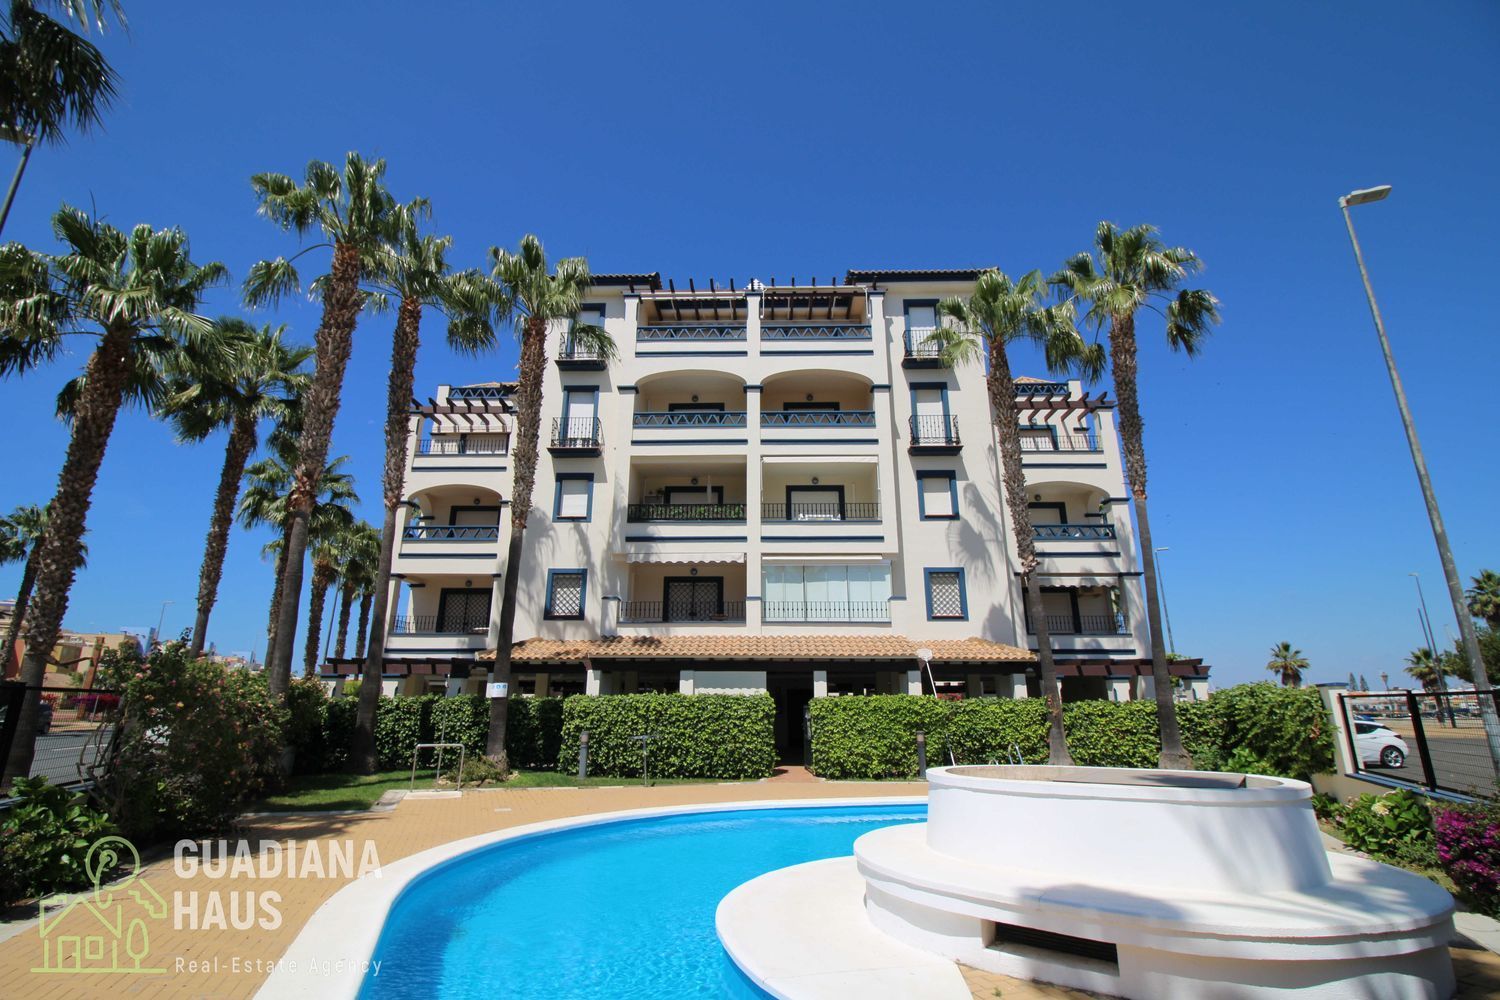 Apartment for sale on the seafront on Calle Robalito, in Isla Canela